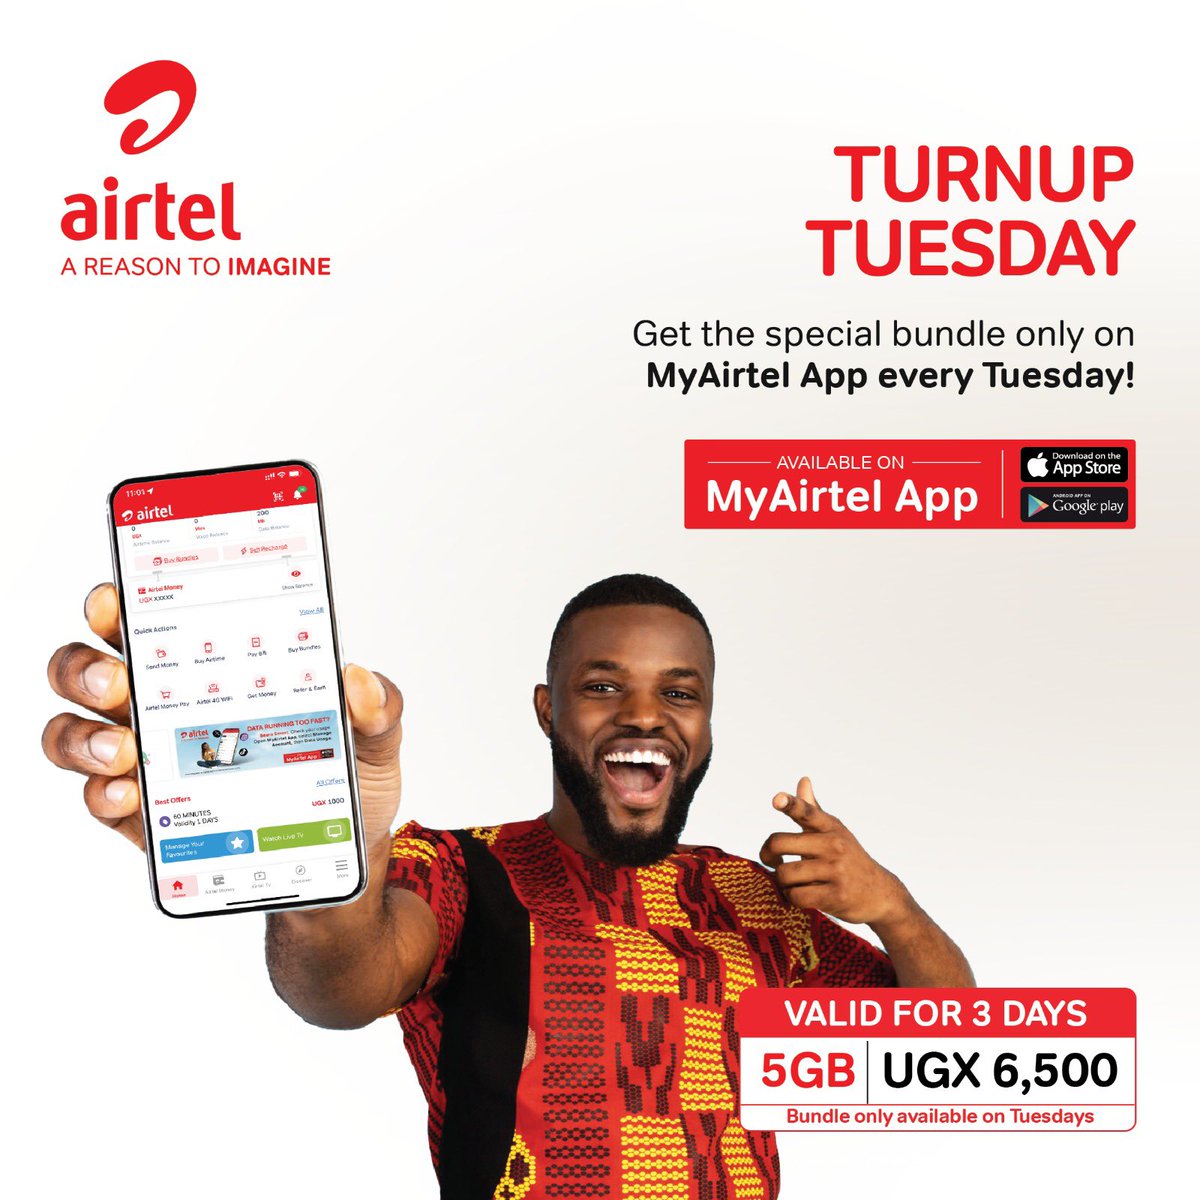 Grab the #TurnUpTuesday offer on the My airtel app through airtelafrica.onelink.me/cGyr/qgj4qeu2
At only 6500 ugsh you get 5GB valid for 3 days as we wait for Freaky Friday